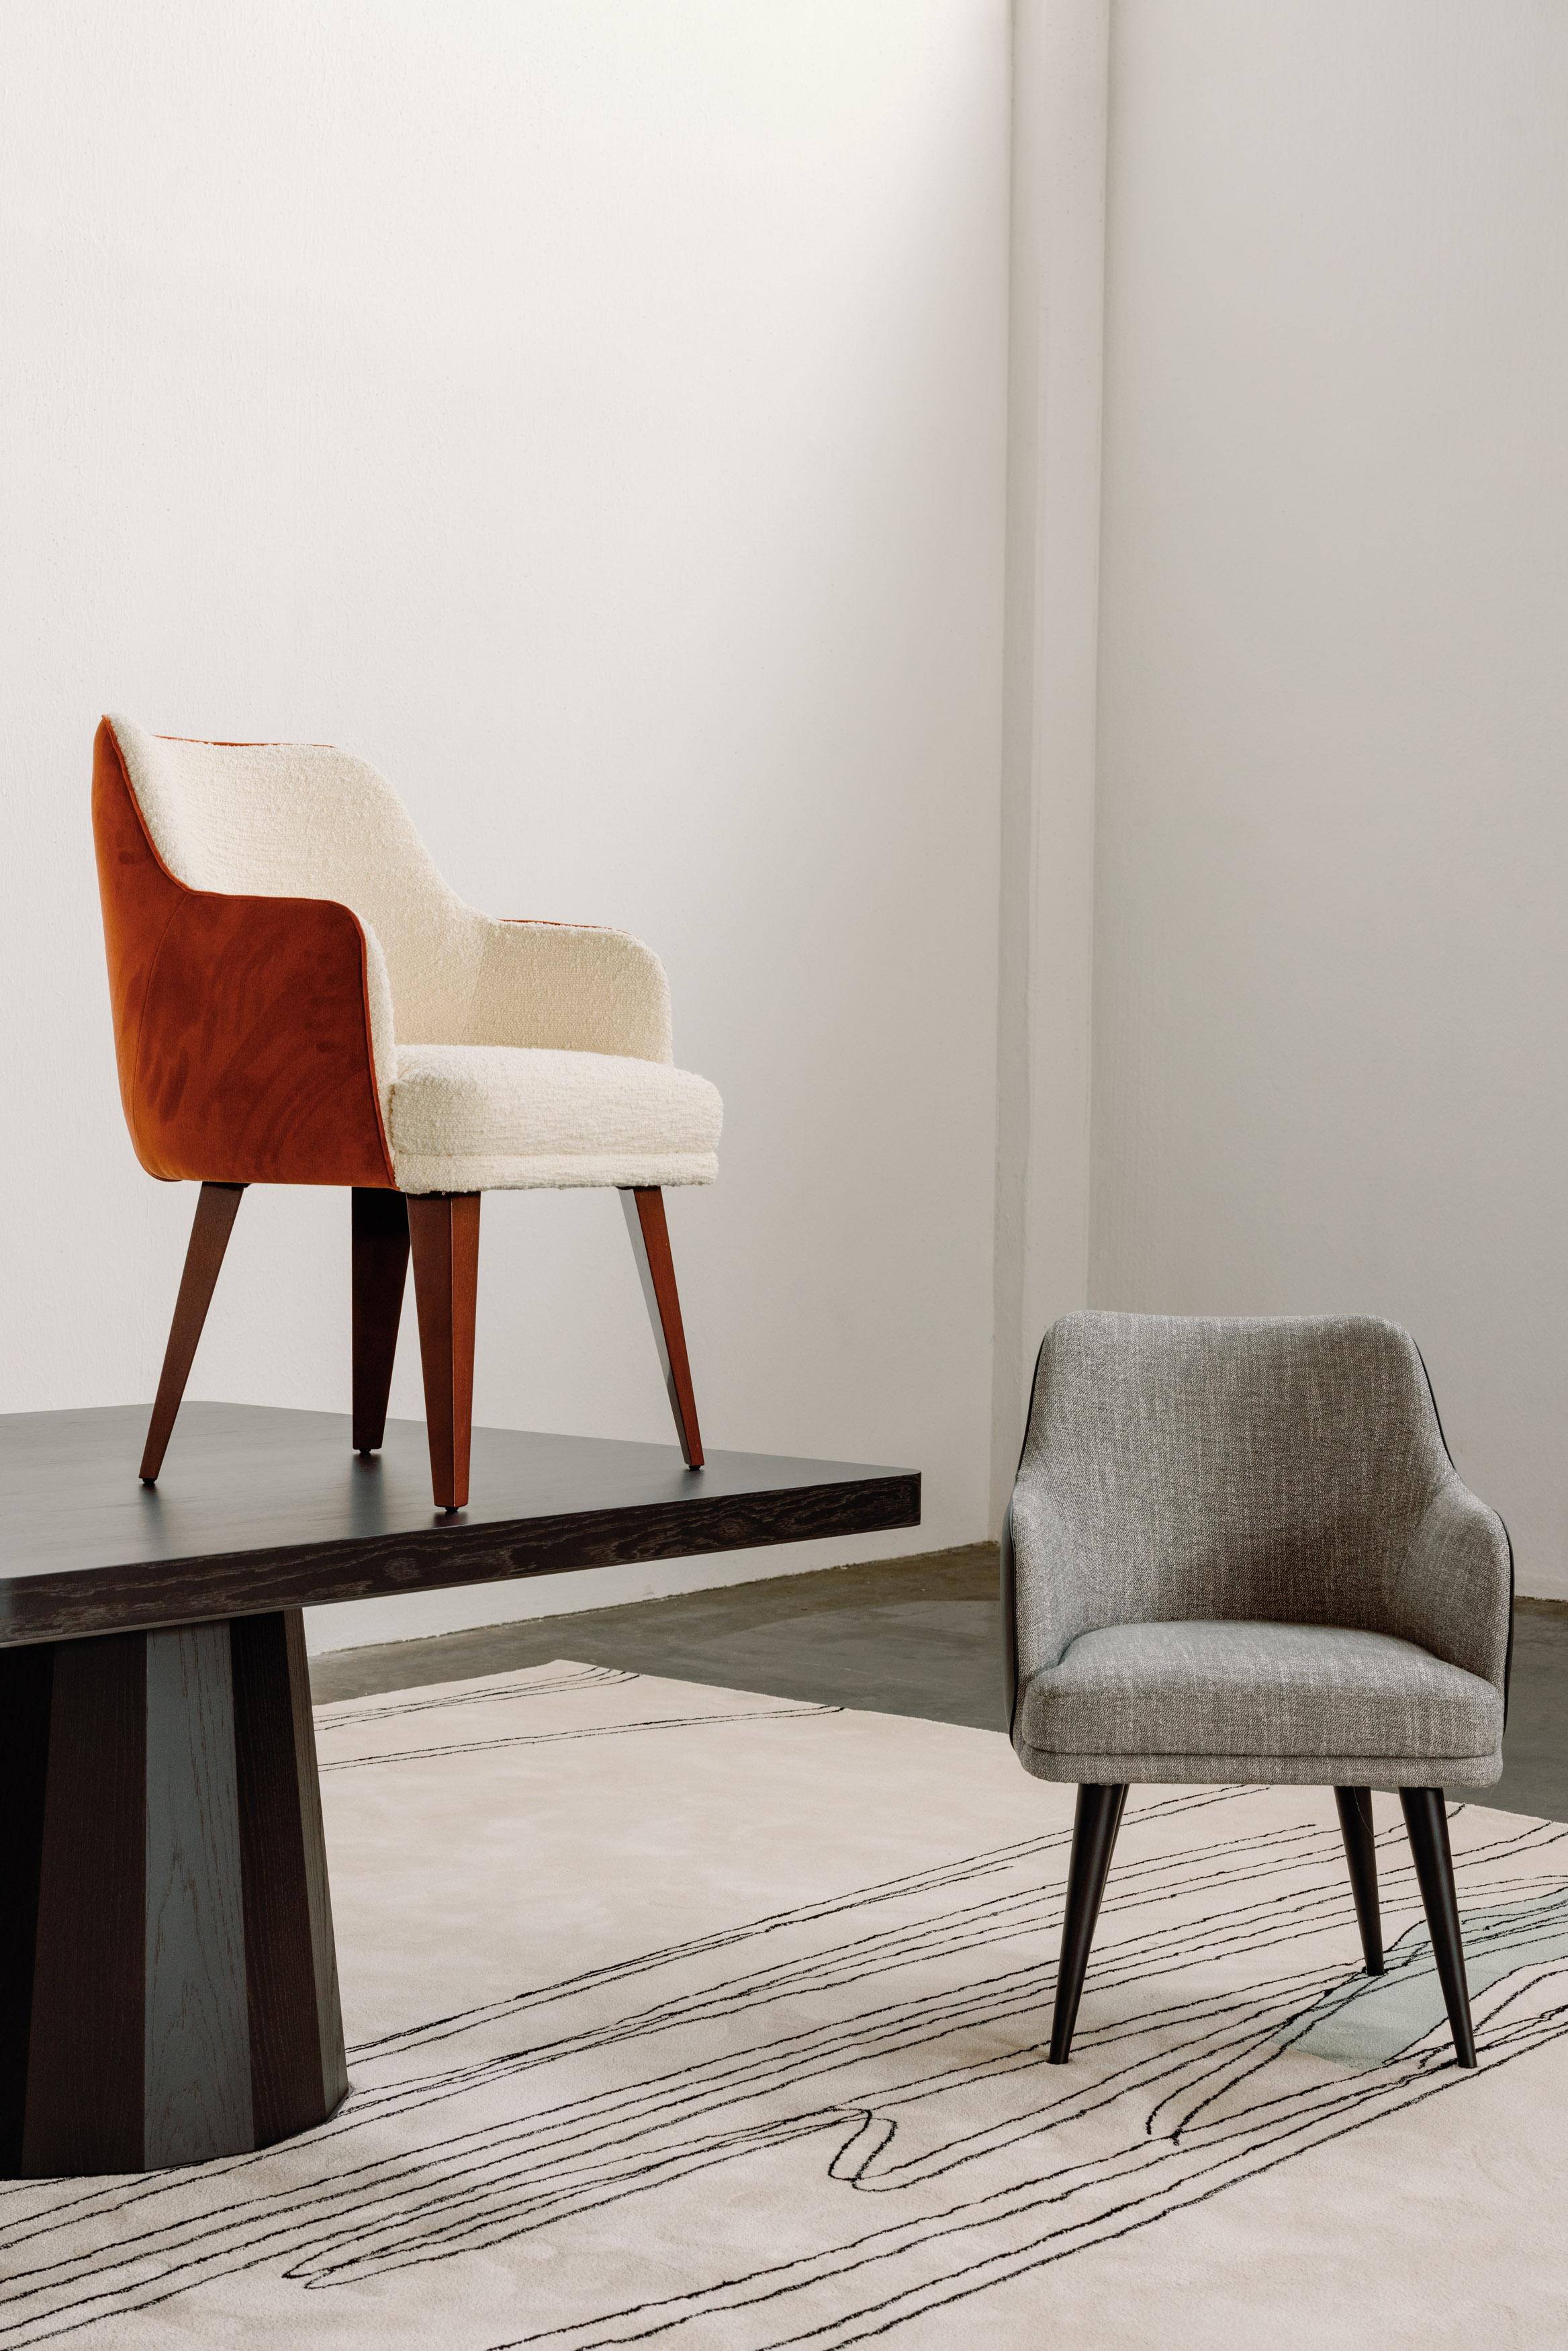 Margot Chair, Modern Collection, Handcrafted in Portugal - Europe by GF Modern.

The Margot bouclé dining chair stands as a contemporary piece that redefines the standards of modern living. The interplay of soft, graceful lines and premium materials